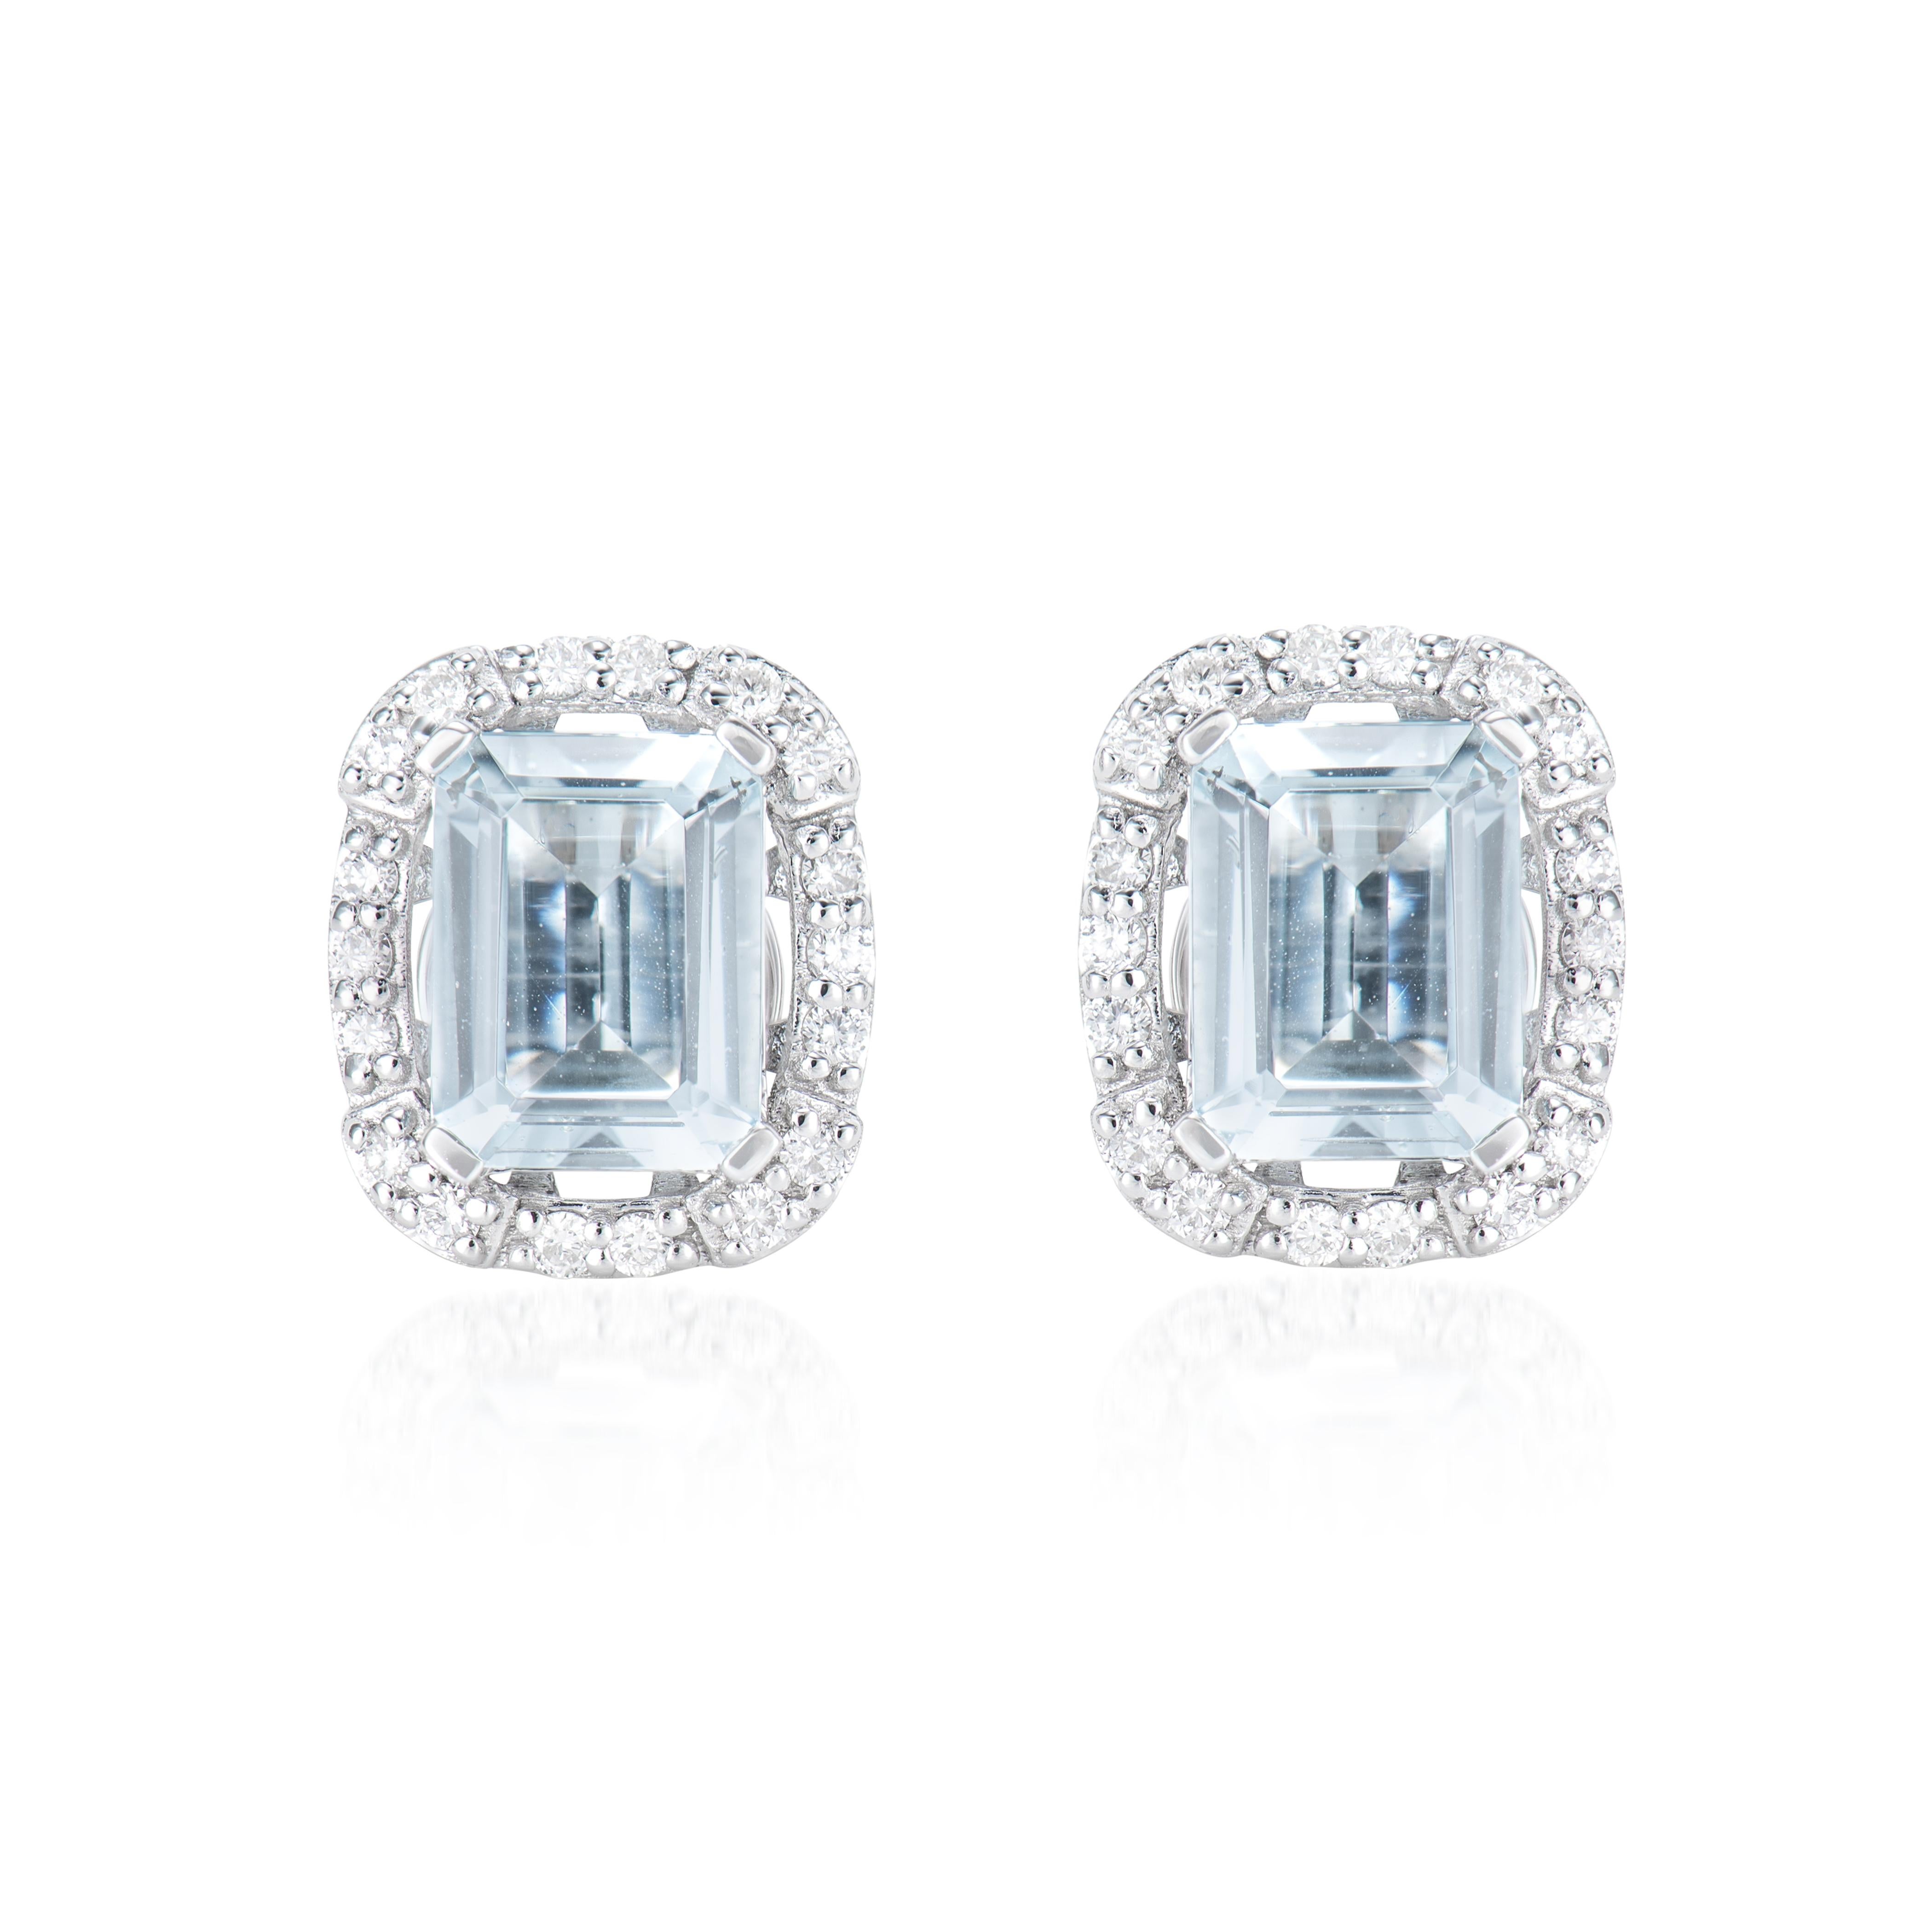 Contemporary 2.46 Carat Aquamarine Stud Earrings in 18 Karat White Gold with White Diamond For Sale